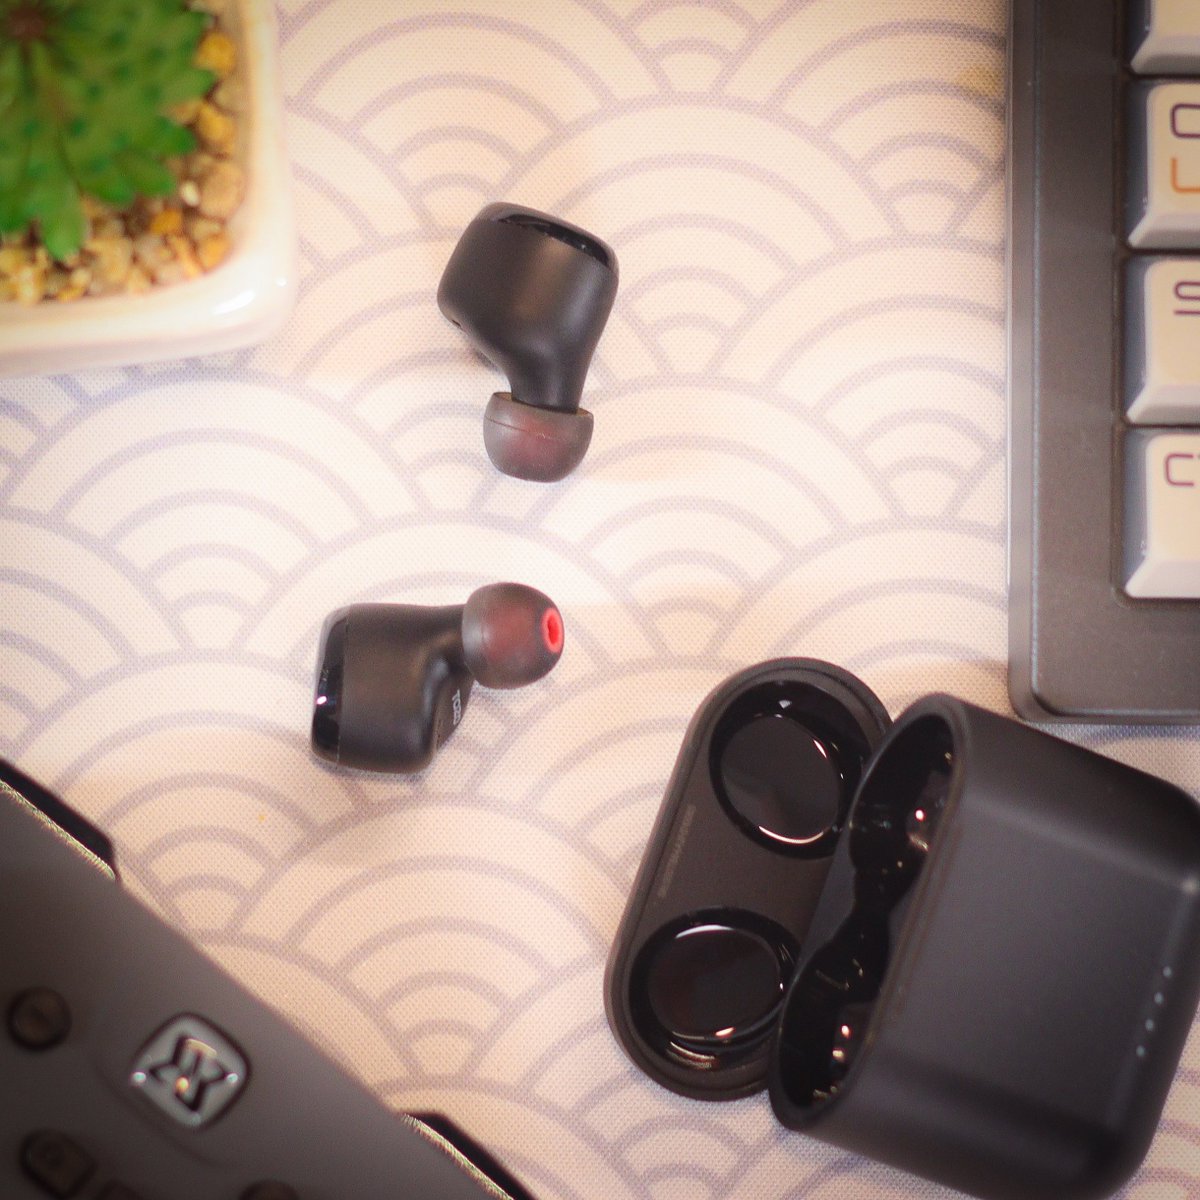 Jamming in style with @geracaosmartbr and the game-changing Tozo T6 earbuds! 🎧

#TOZO #TOZOT6 #TozoT6NextGen #earbuds #mood #style #lifestyle #vibes #music #StyleVibes #wirelessearbuds #tws #gadgets #tech #review